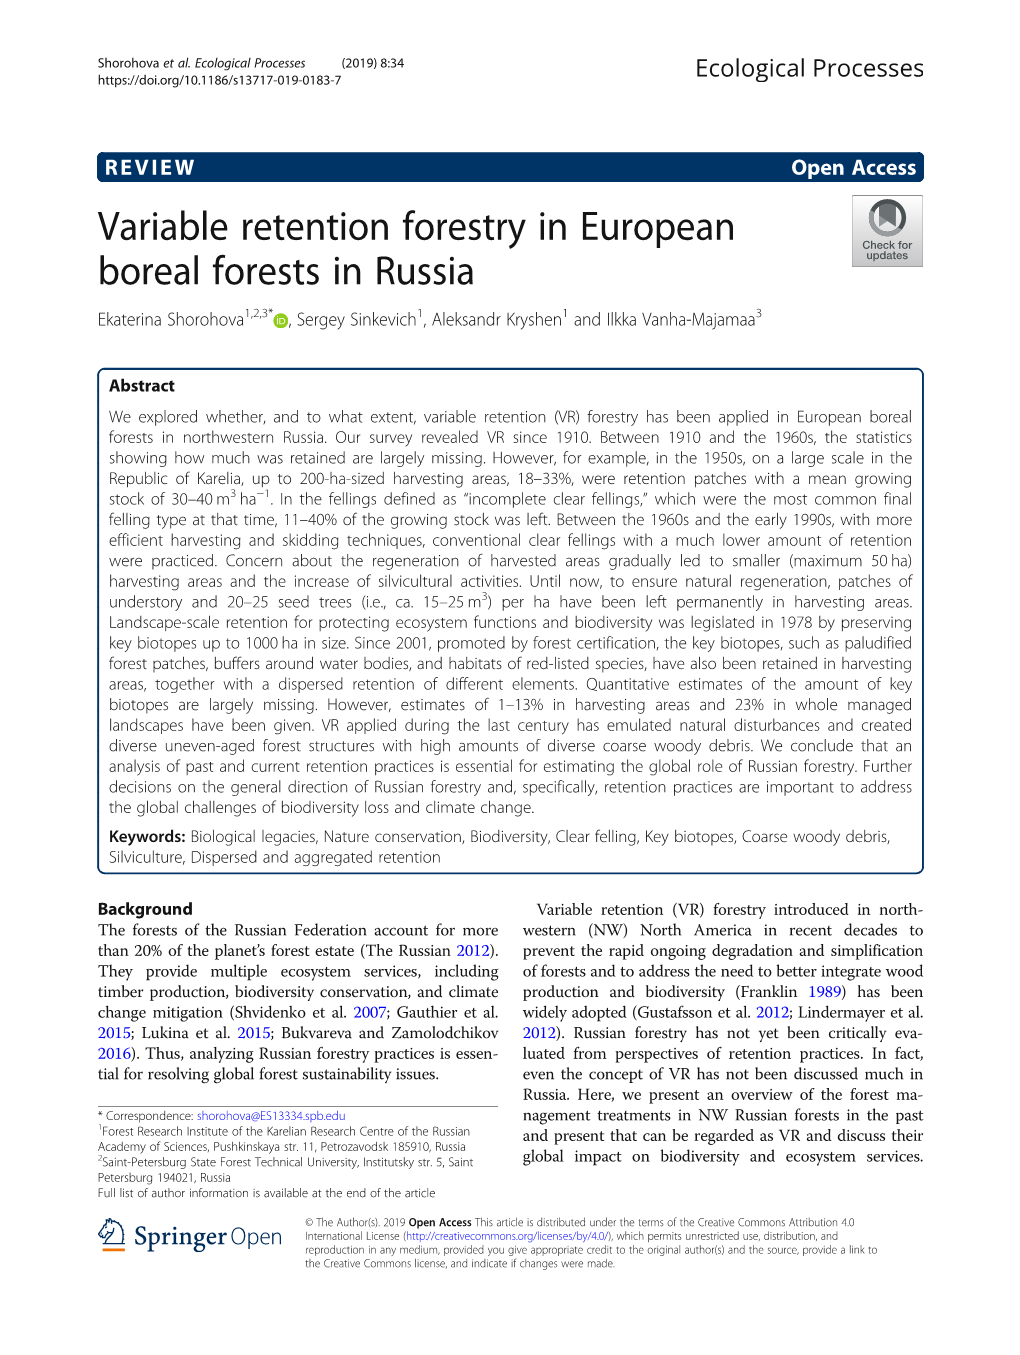 Variable Retention Forestry in European Boreal Forests in Russia Ekaterina Shorohova1,2,3* , Sergey Sinkevich1, Aleksandr Kryshen1 and Ilkka Vanha-Majamaa3